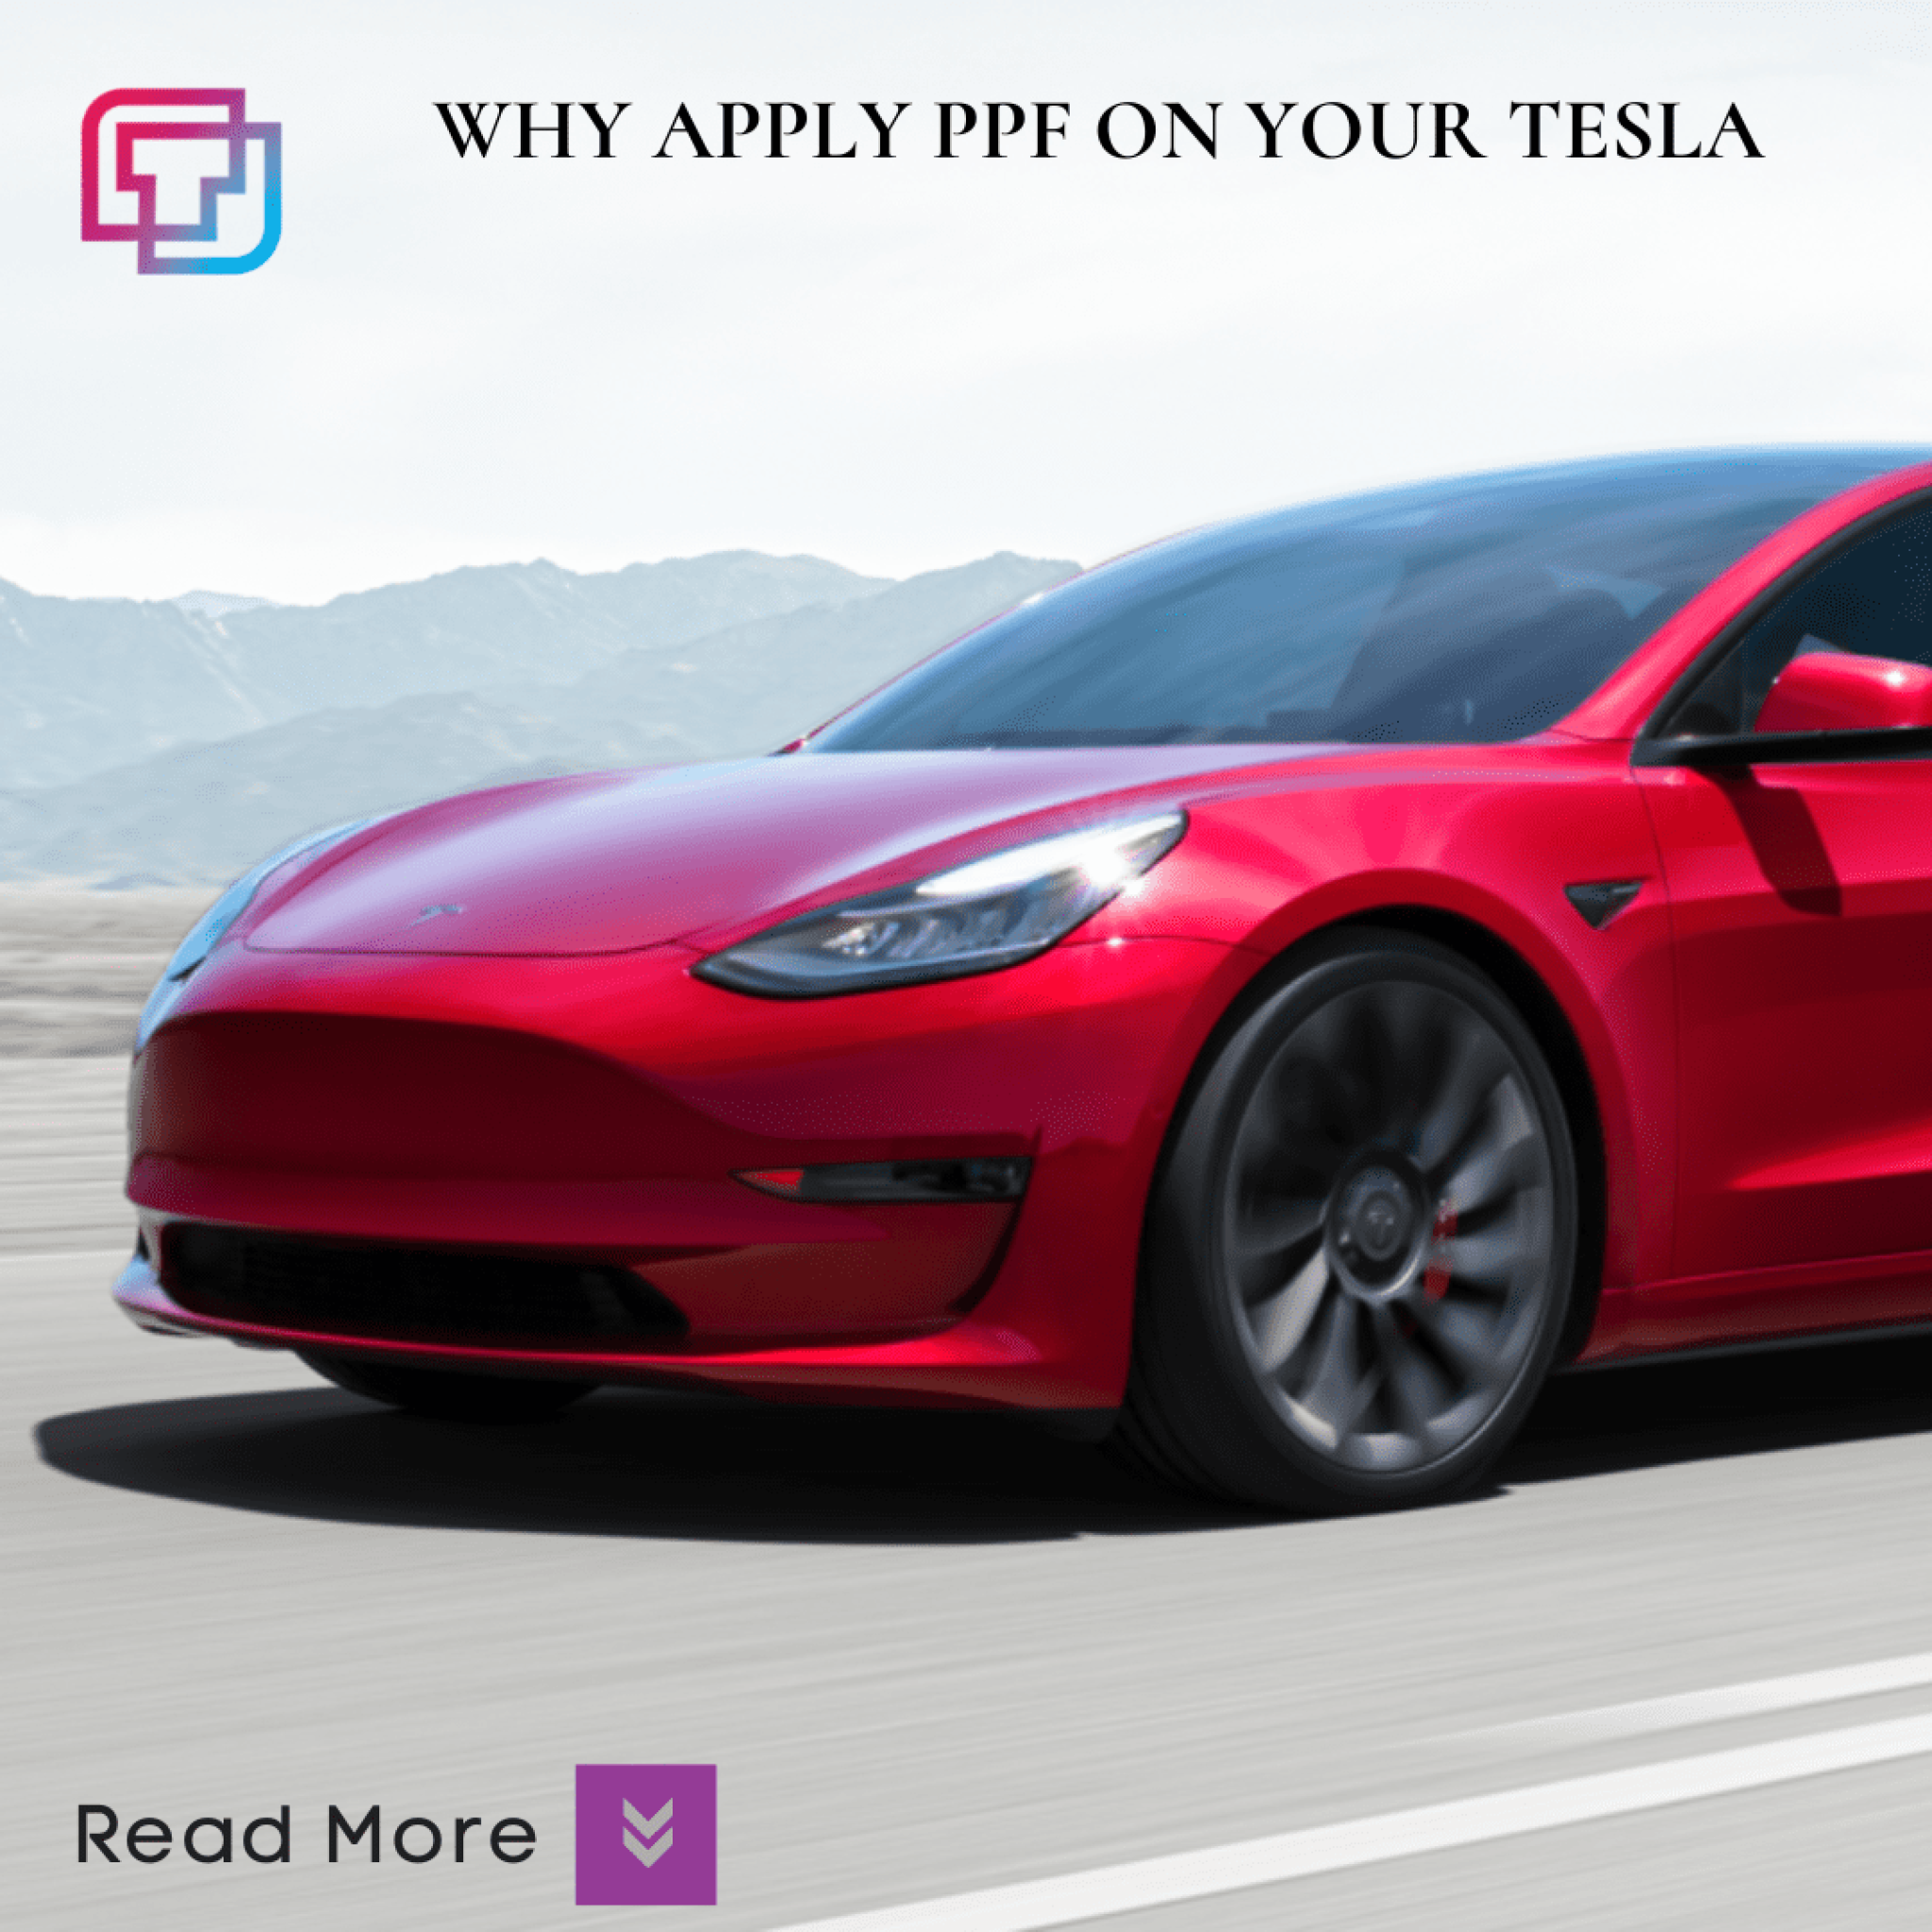 Why apply ppf on your tesla